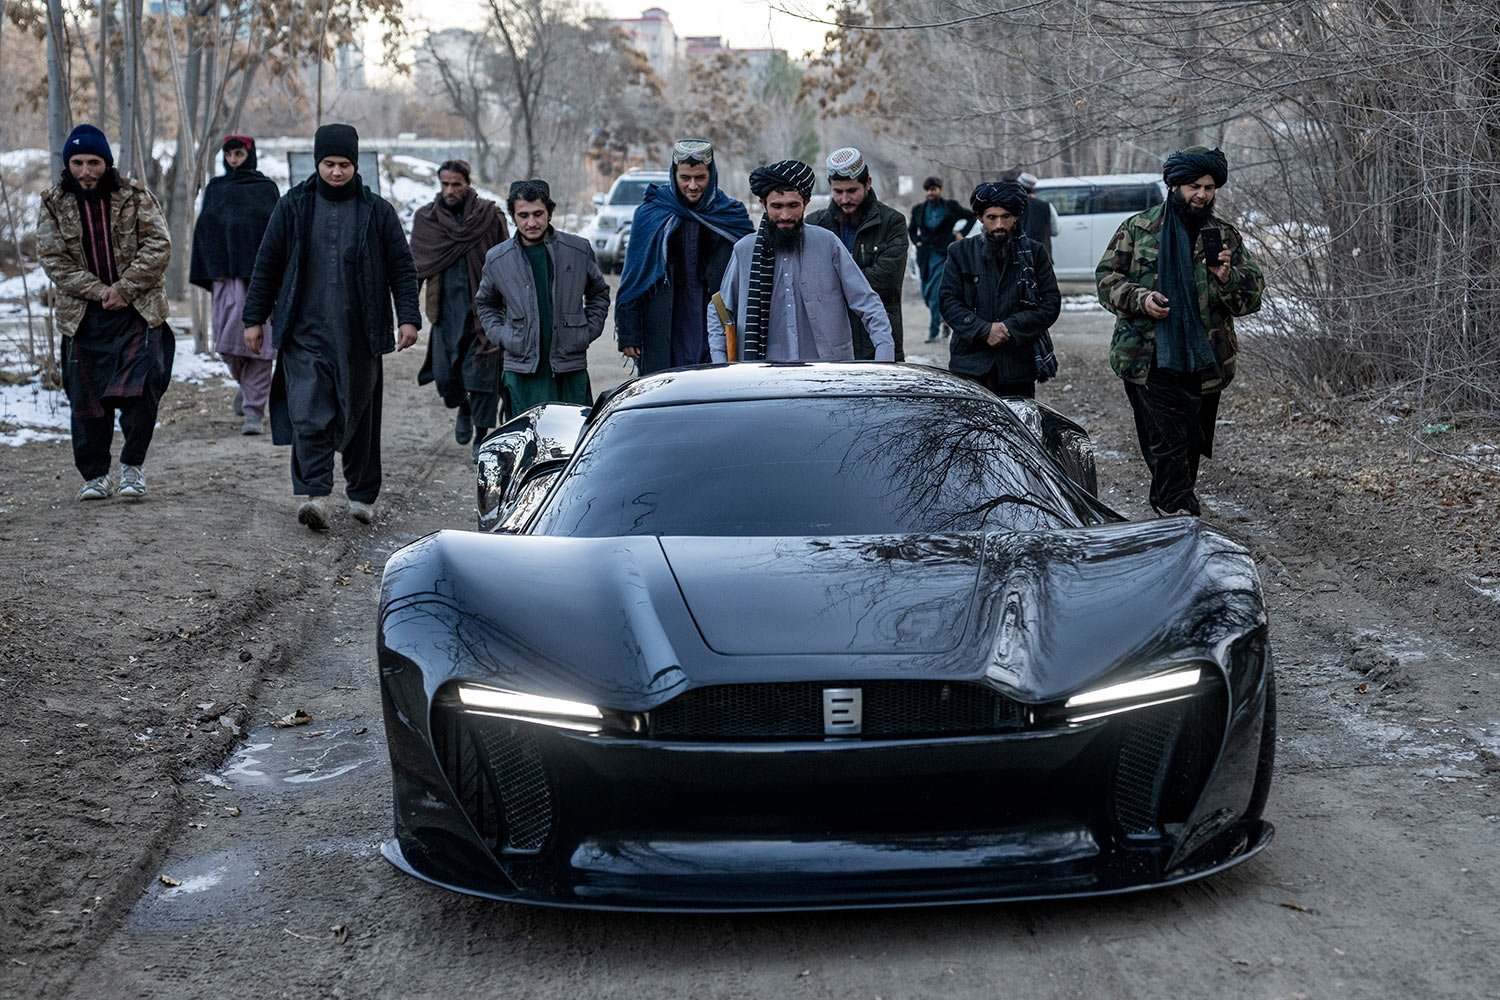  A first Afghan made sports car is seen outside the Entop car studio in Kabul, Afghanistan, Friday, Jan. 13, 2023. (AP Photo/Ebrahim Noroozi) 